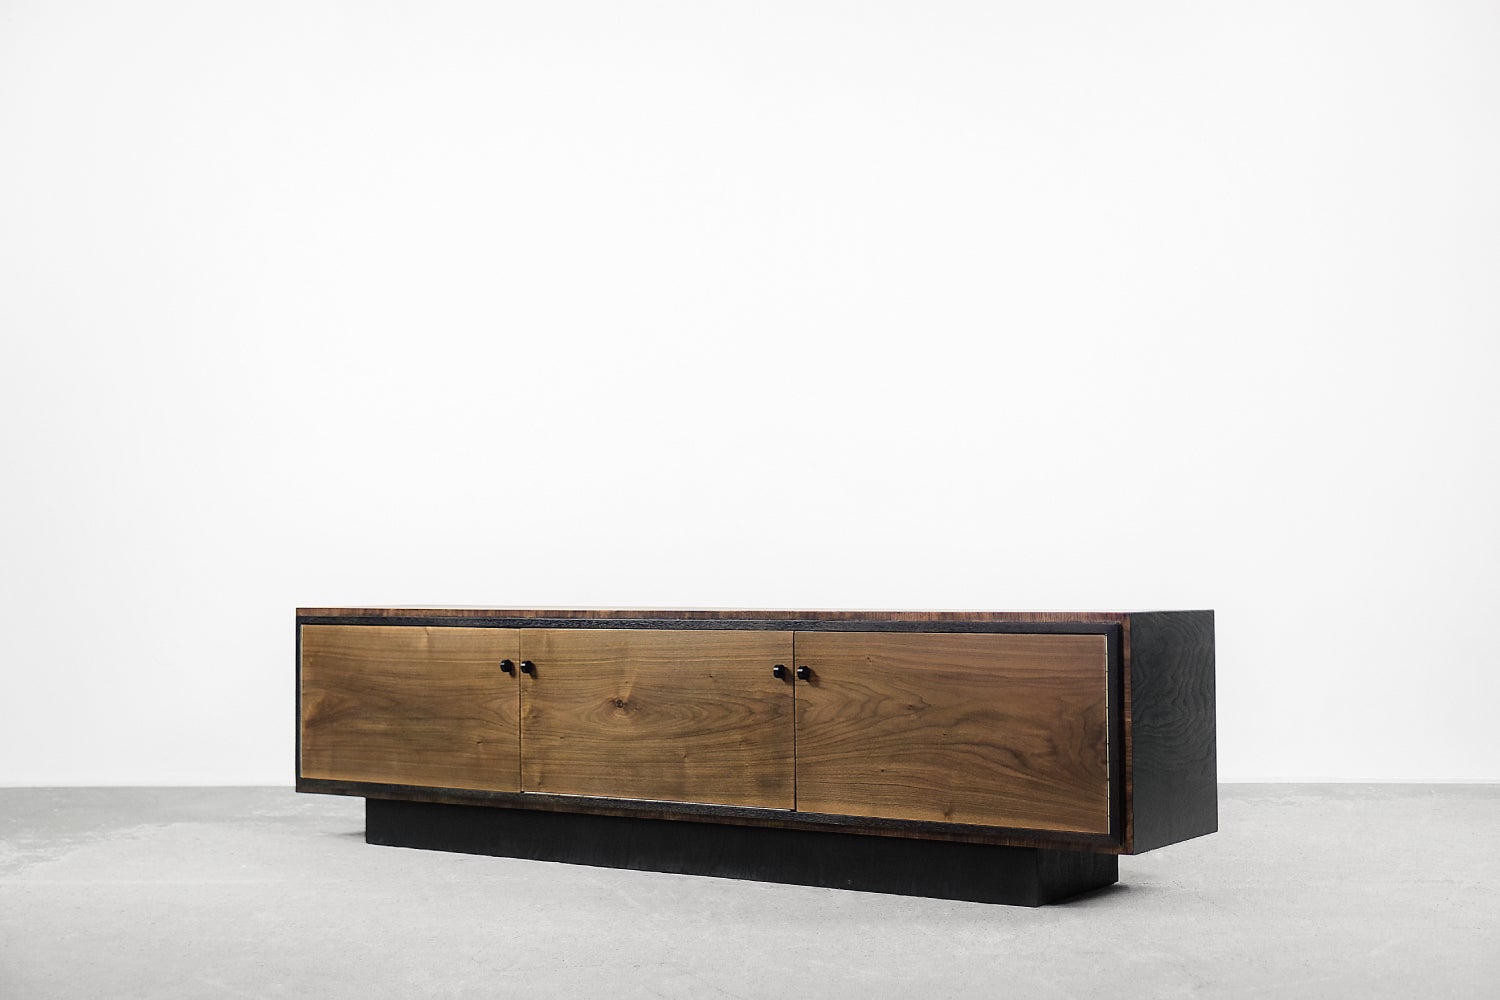 This rare sideboard comes from Scandinavia, where it was probably made during the 1960s. The top and sides are finished with walnut wood in elegant black, with a visible grain pattern. The front is in a natural shade of walnut with round handles.